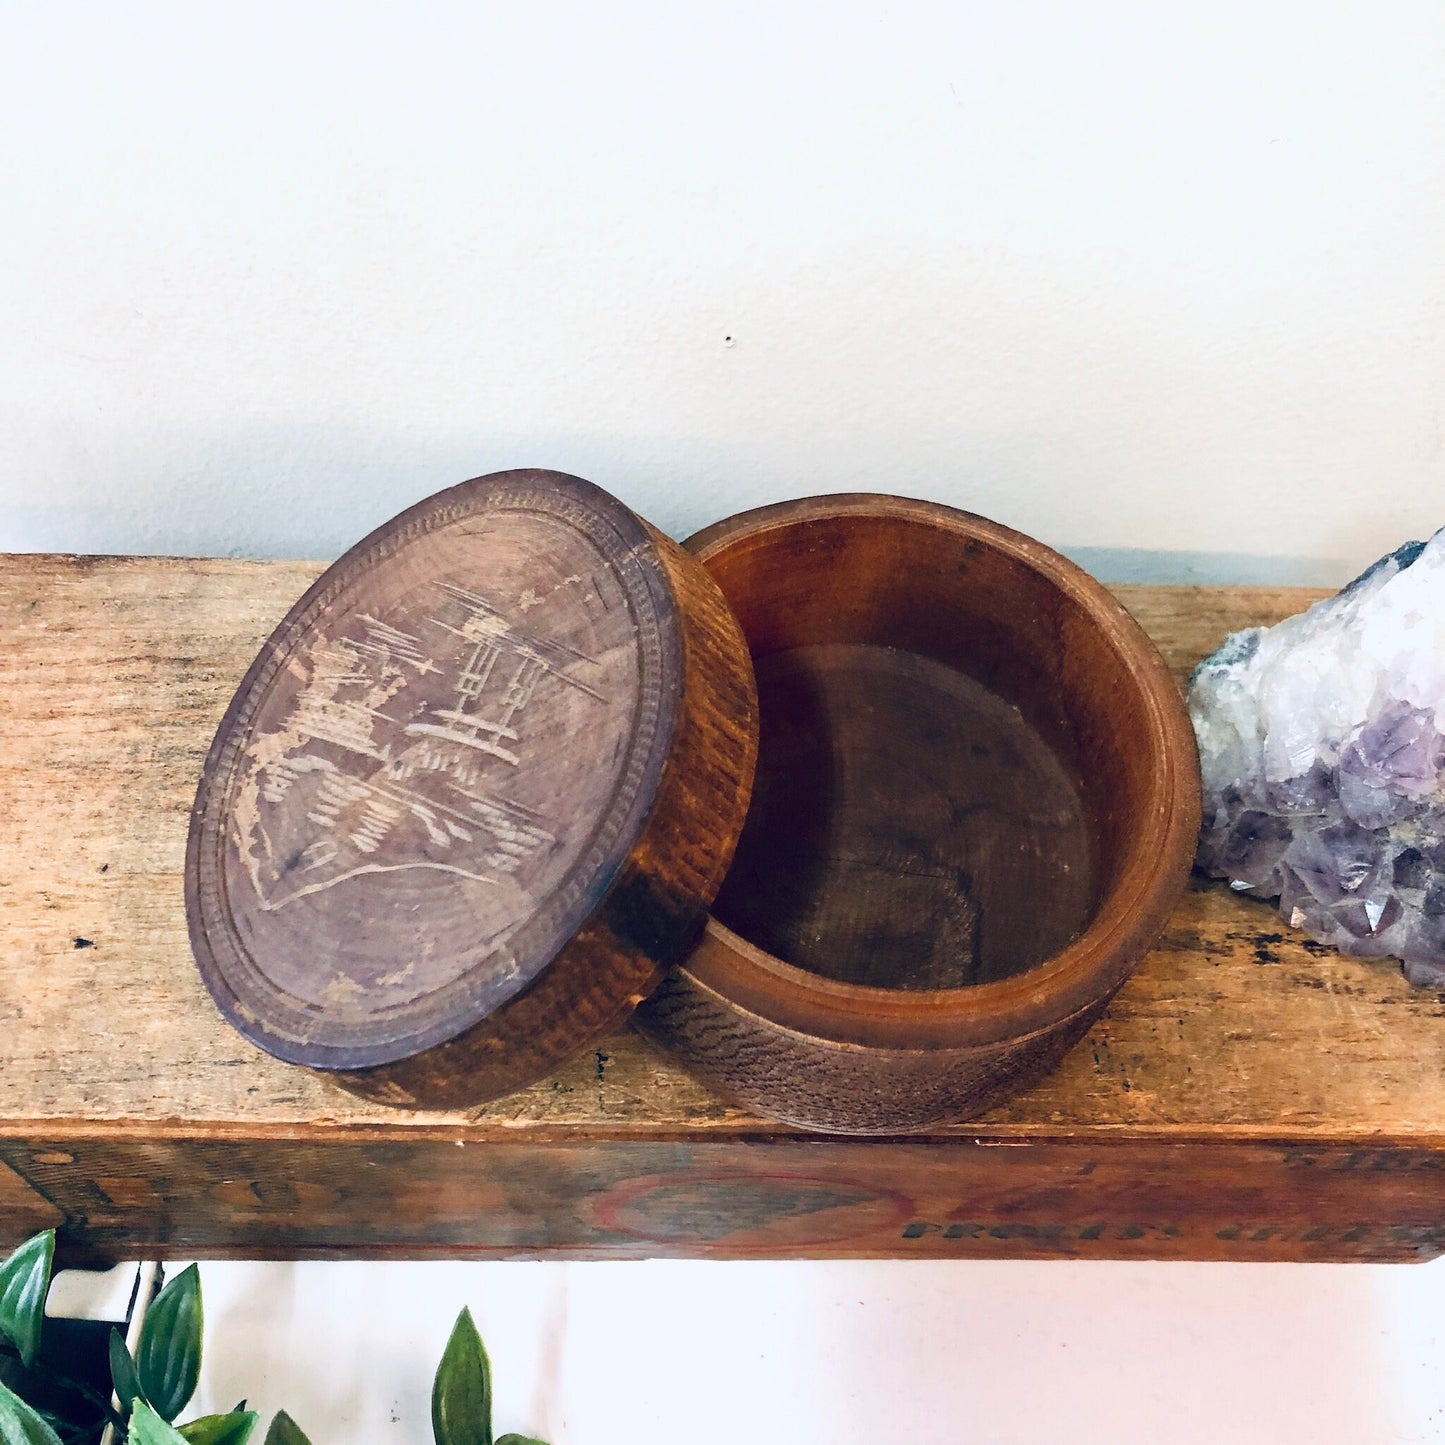 Vintage carved wooden jewelry box with rounded lid partially open, sitting on rustic wooden shelf with amethyst crystal cluster nearby